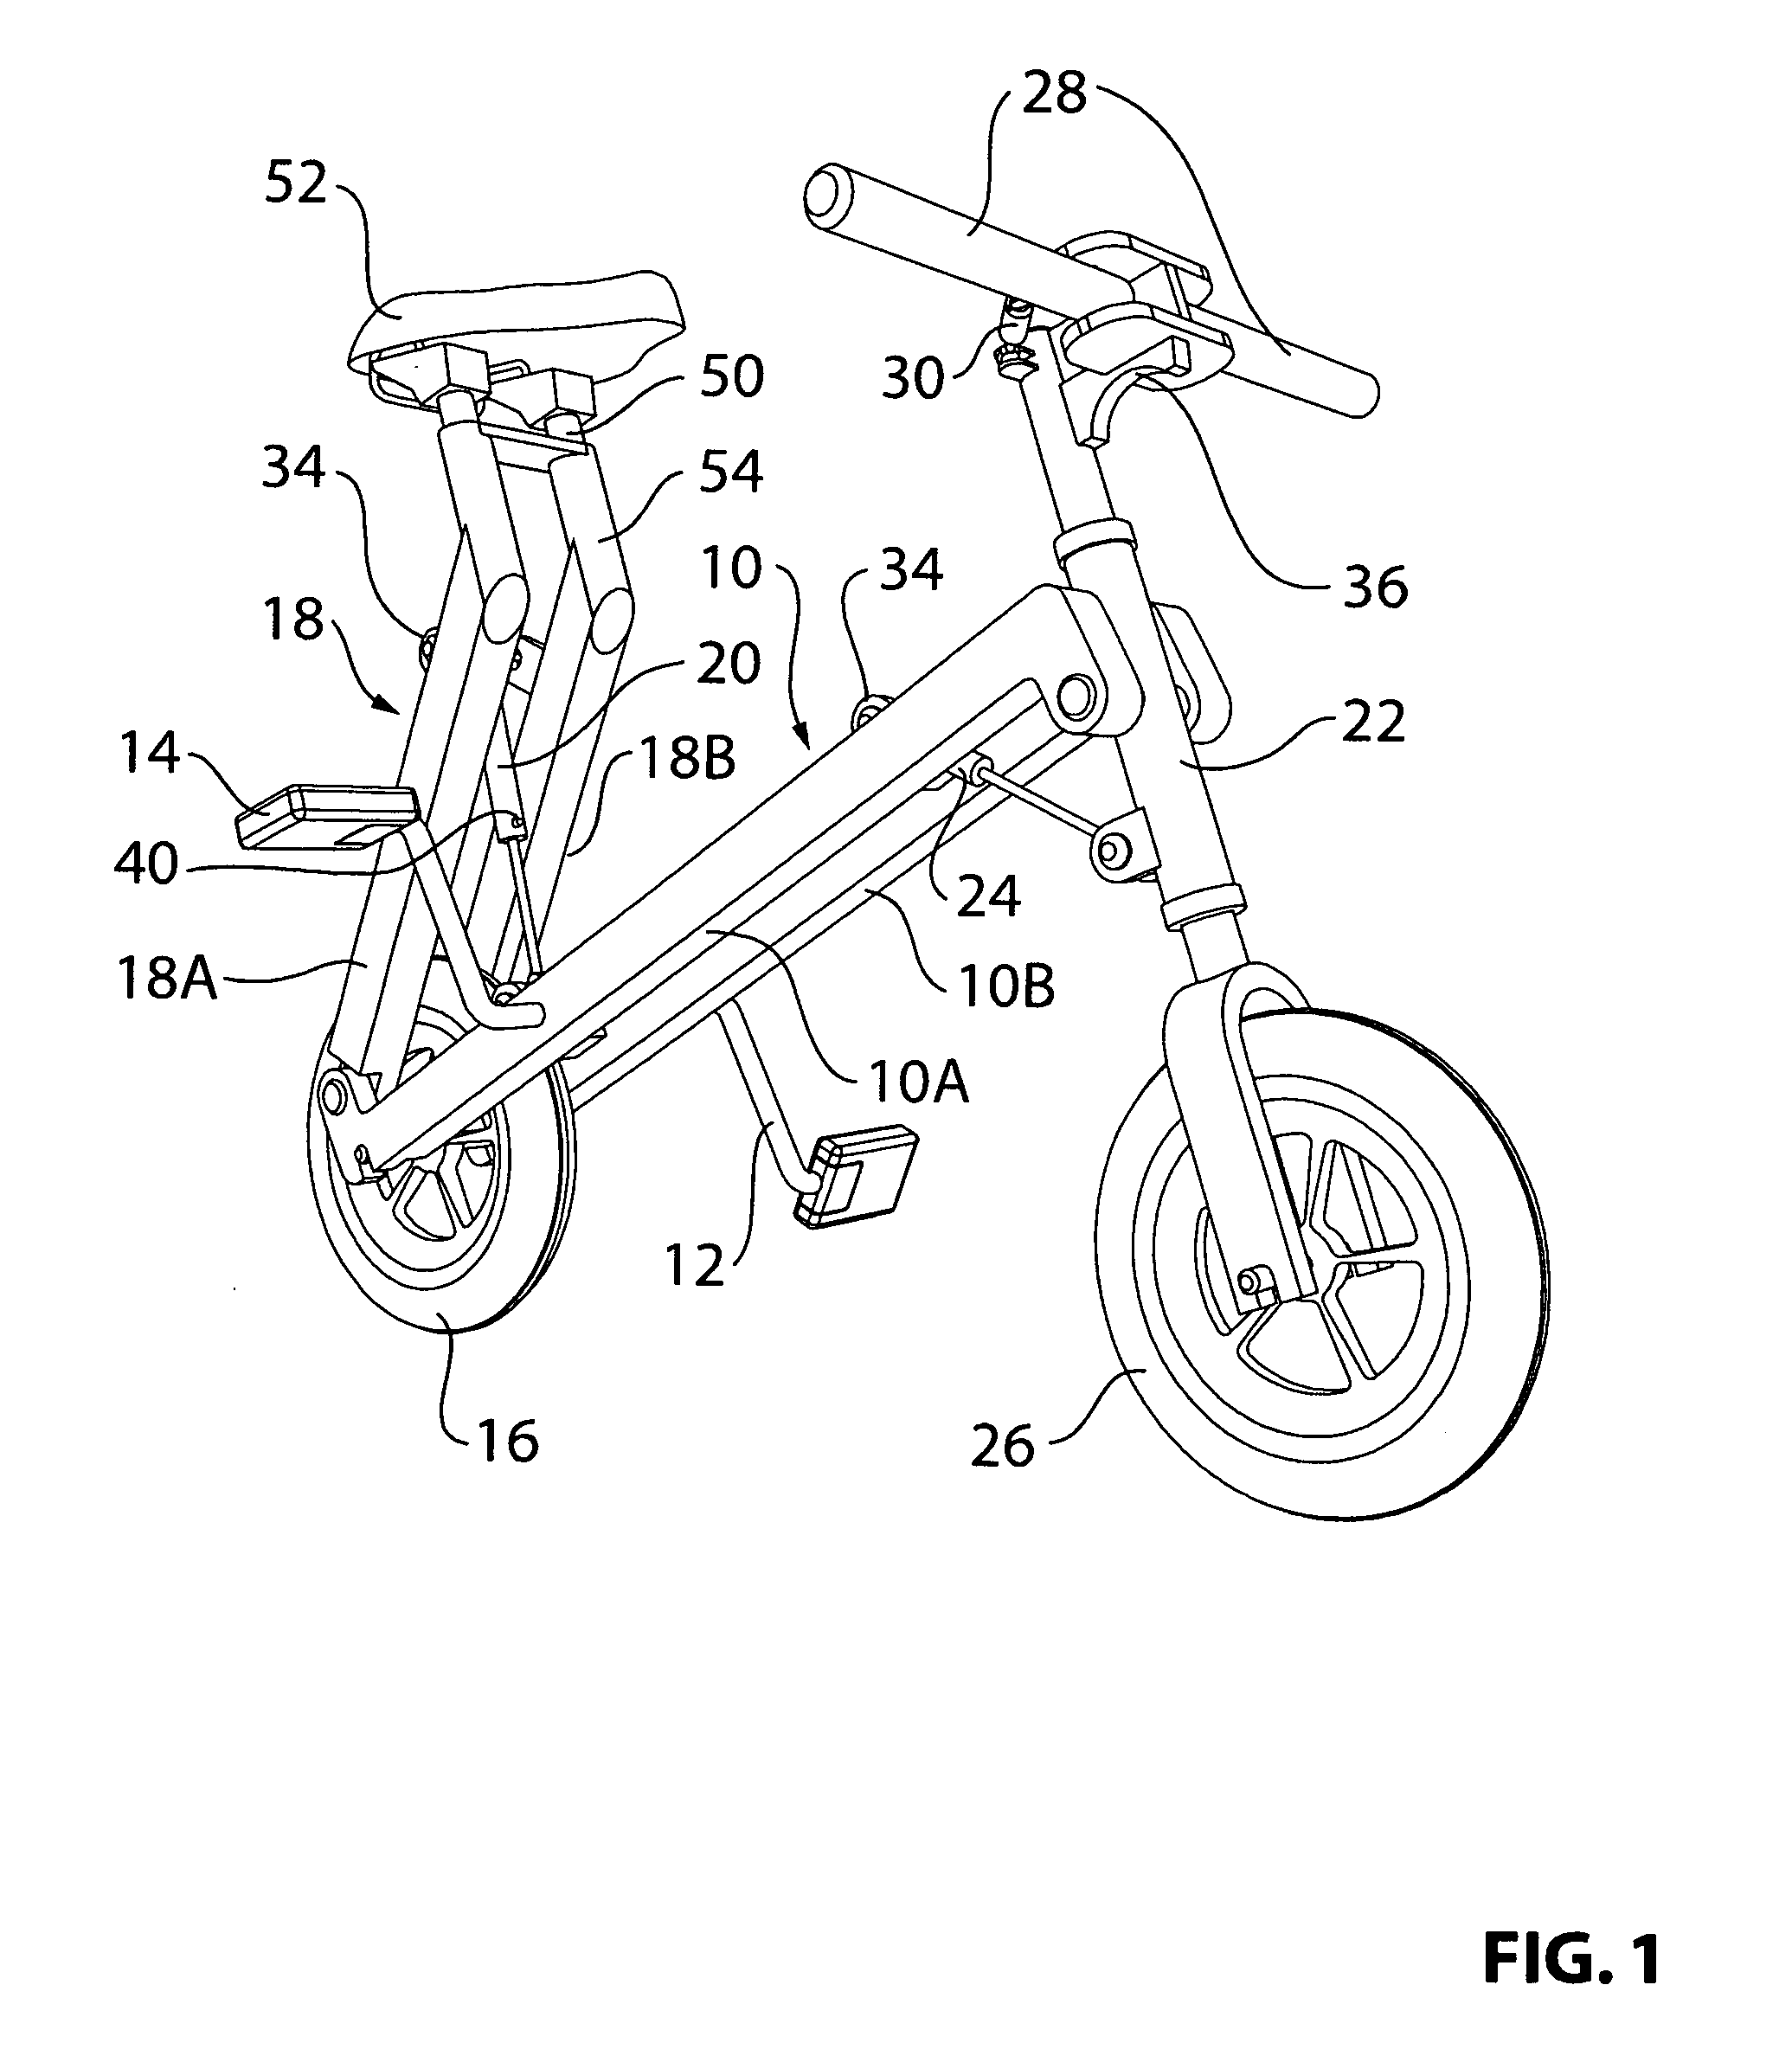 Self powered collapsible bicycle